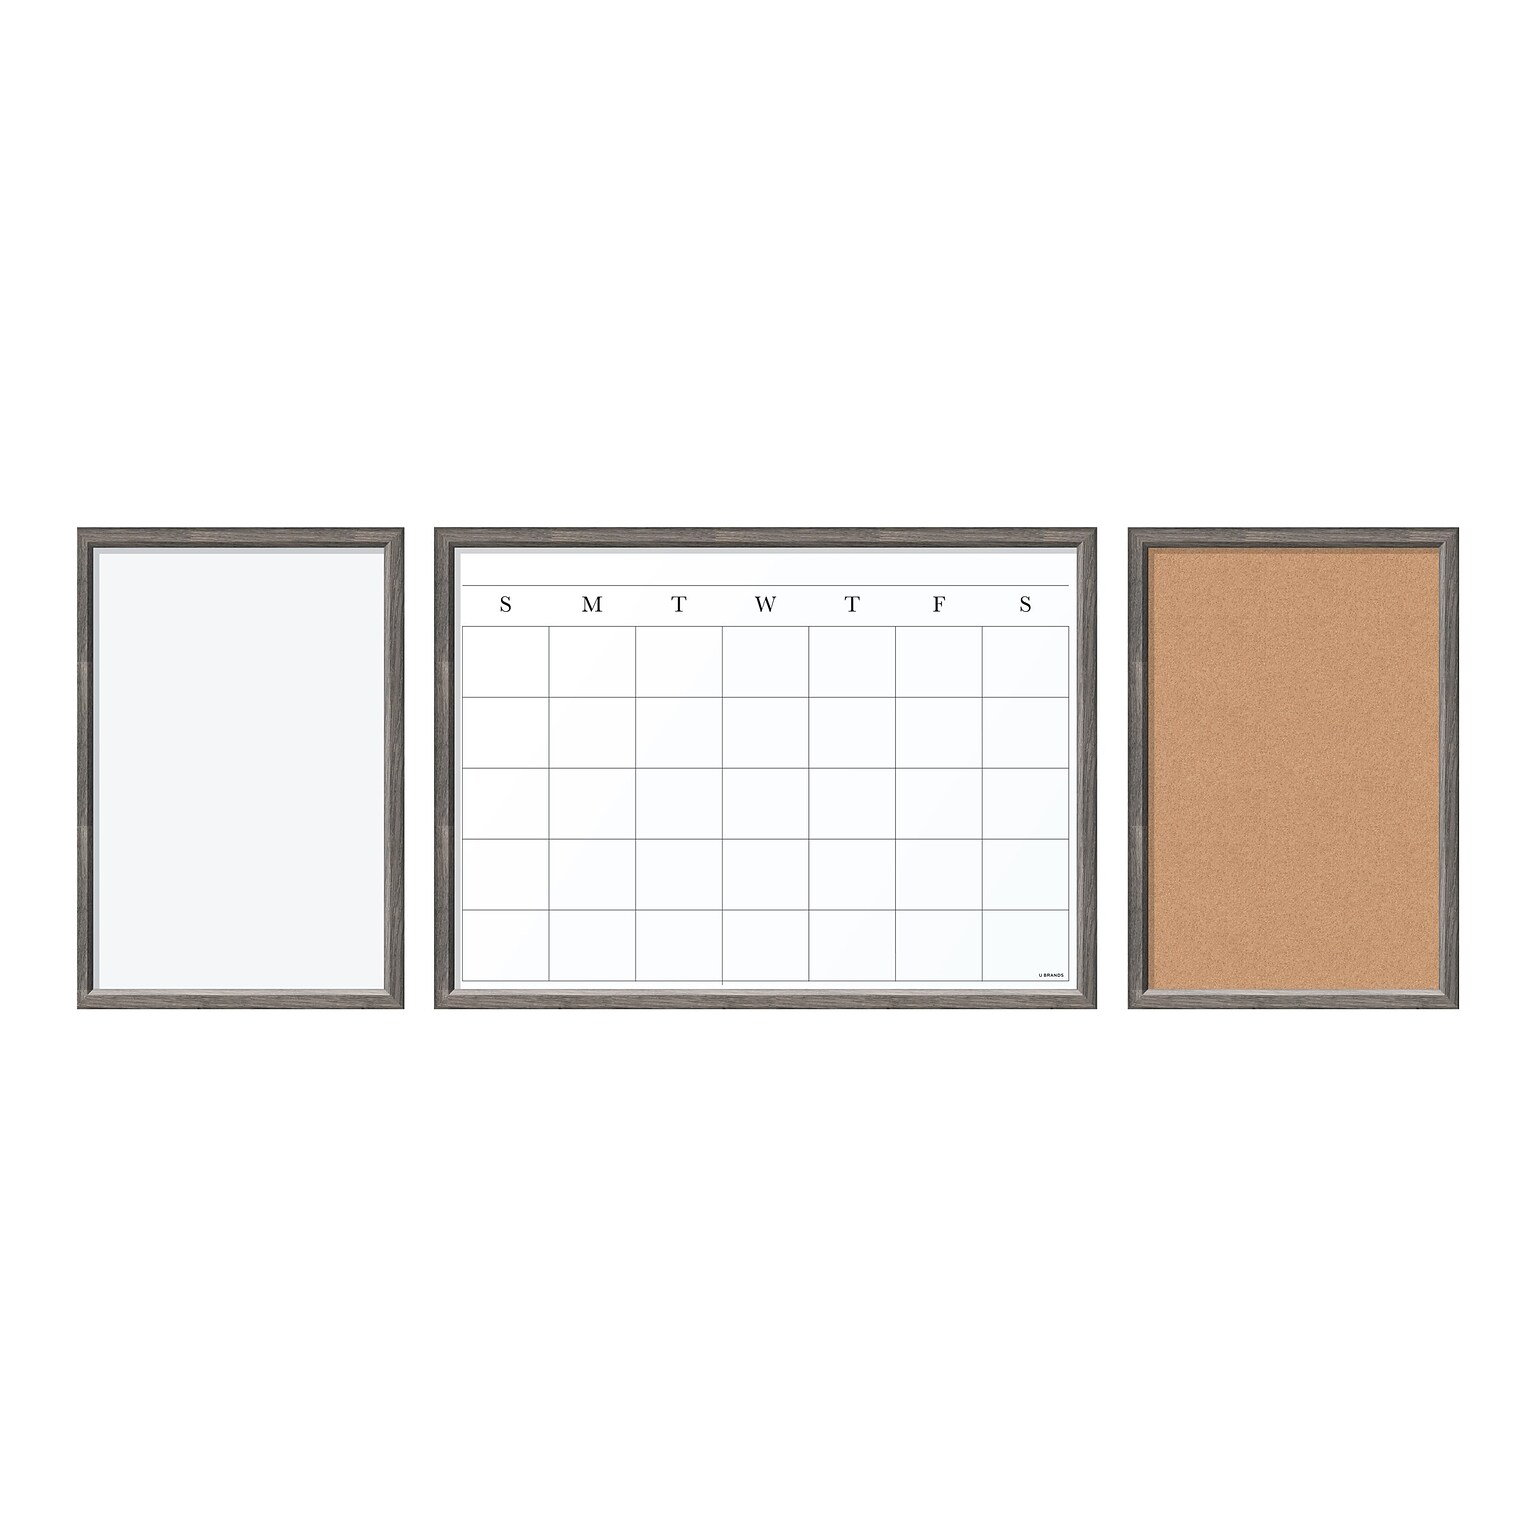 U Brands Combo Dry-Erase and Bulletin Boards with Calendar, MDF Frame, Less than 2 x 2 (4835U00-01)